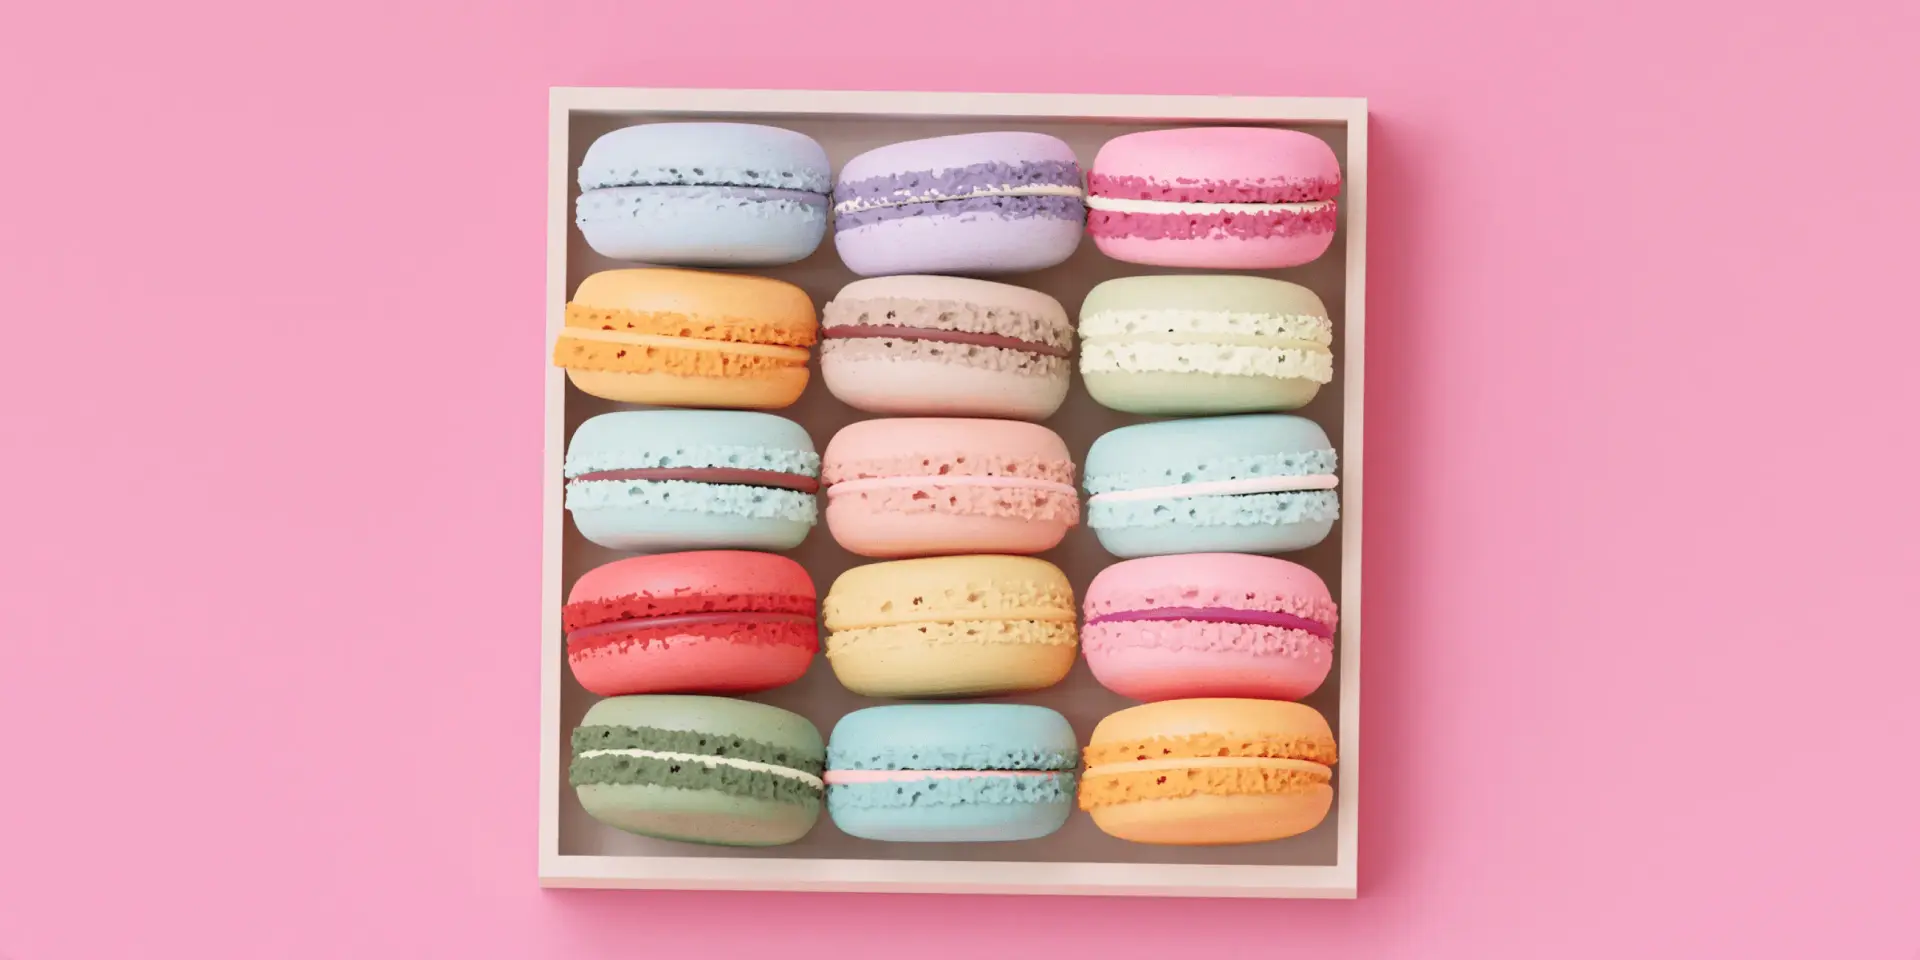 Decorative element showing a batch of macaron cookies.